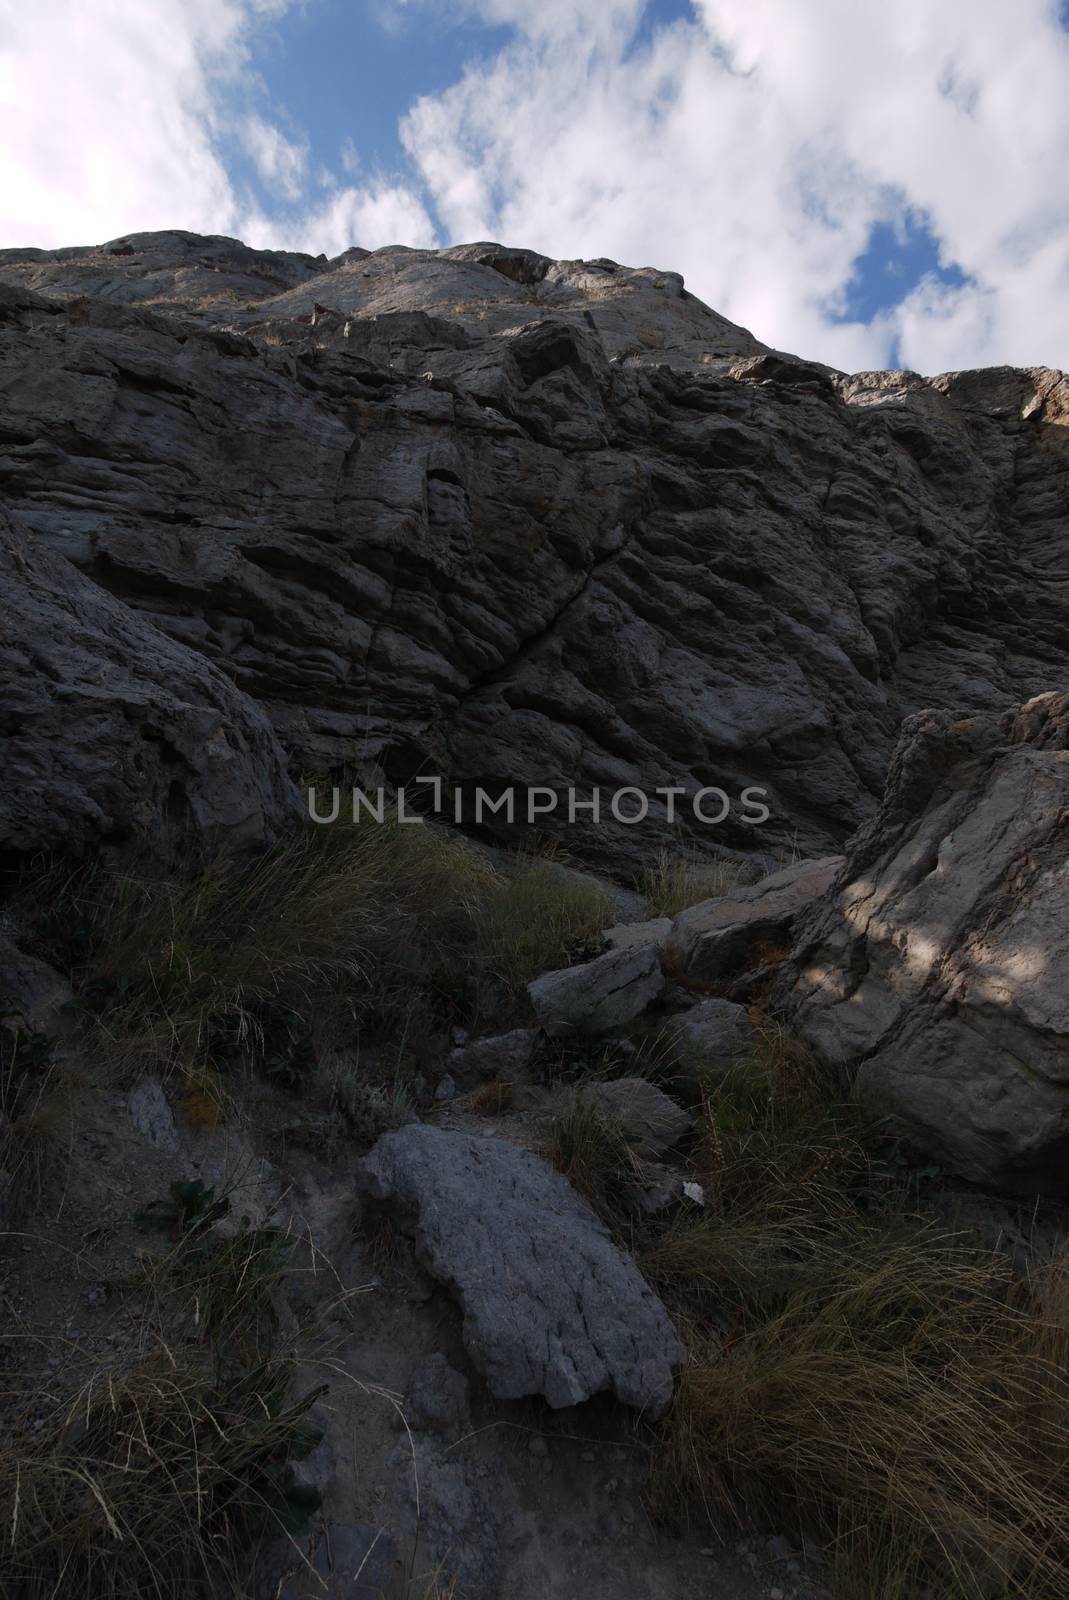 Grassy hollow in a rocky mountain against a blue sky with white clouds